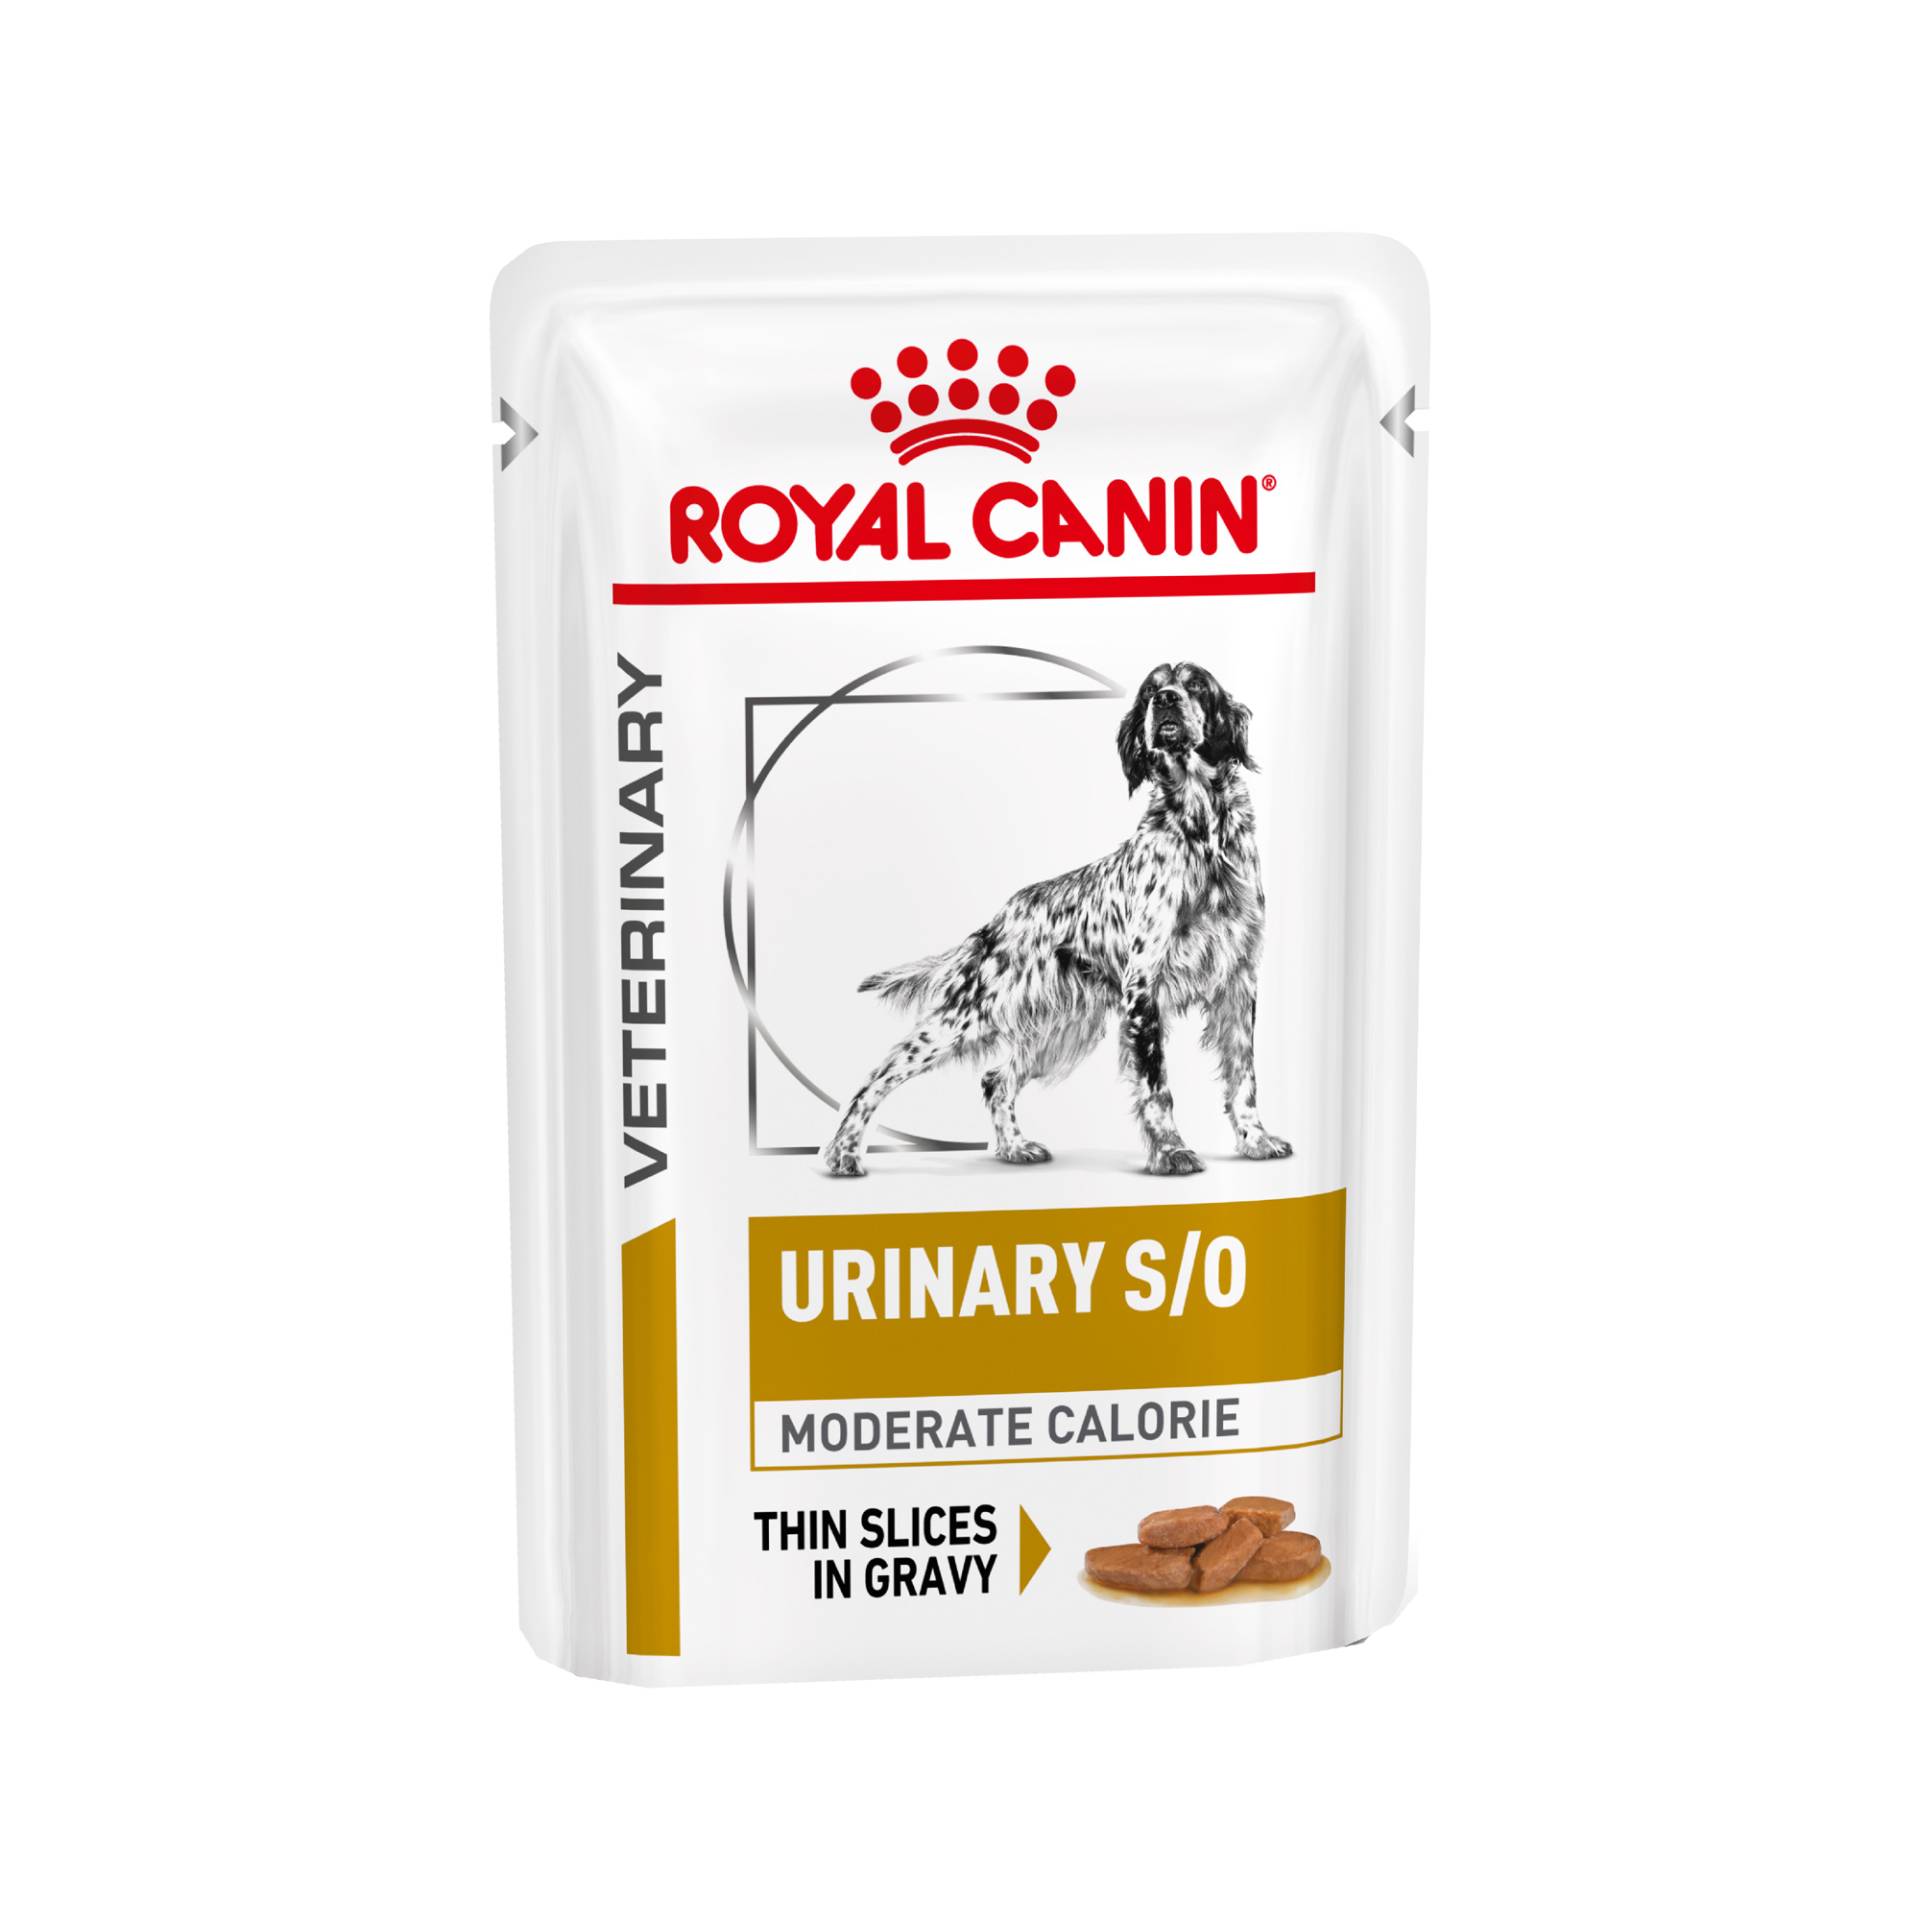 Royal Canin Urinary S/O Moderate Calorie Wet Hund - 24 x 100 g von Royal Canin